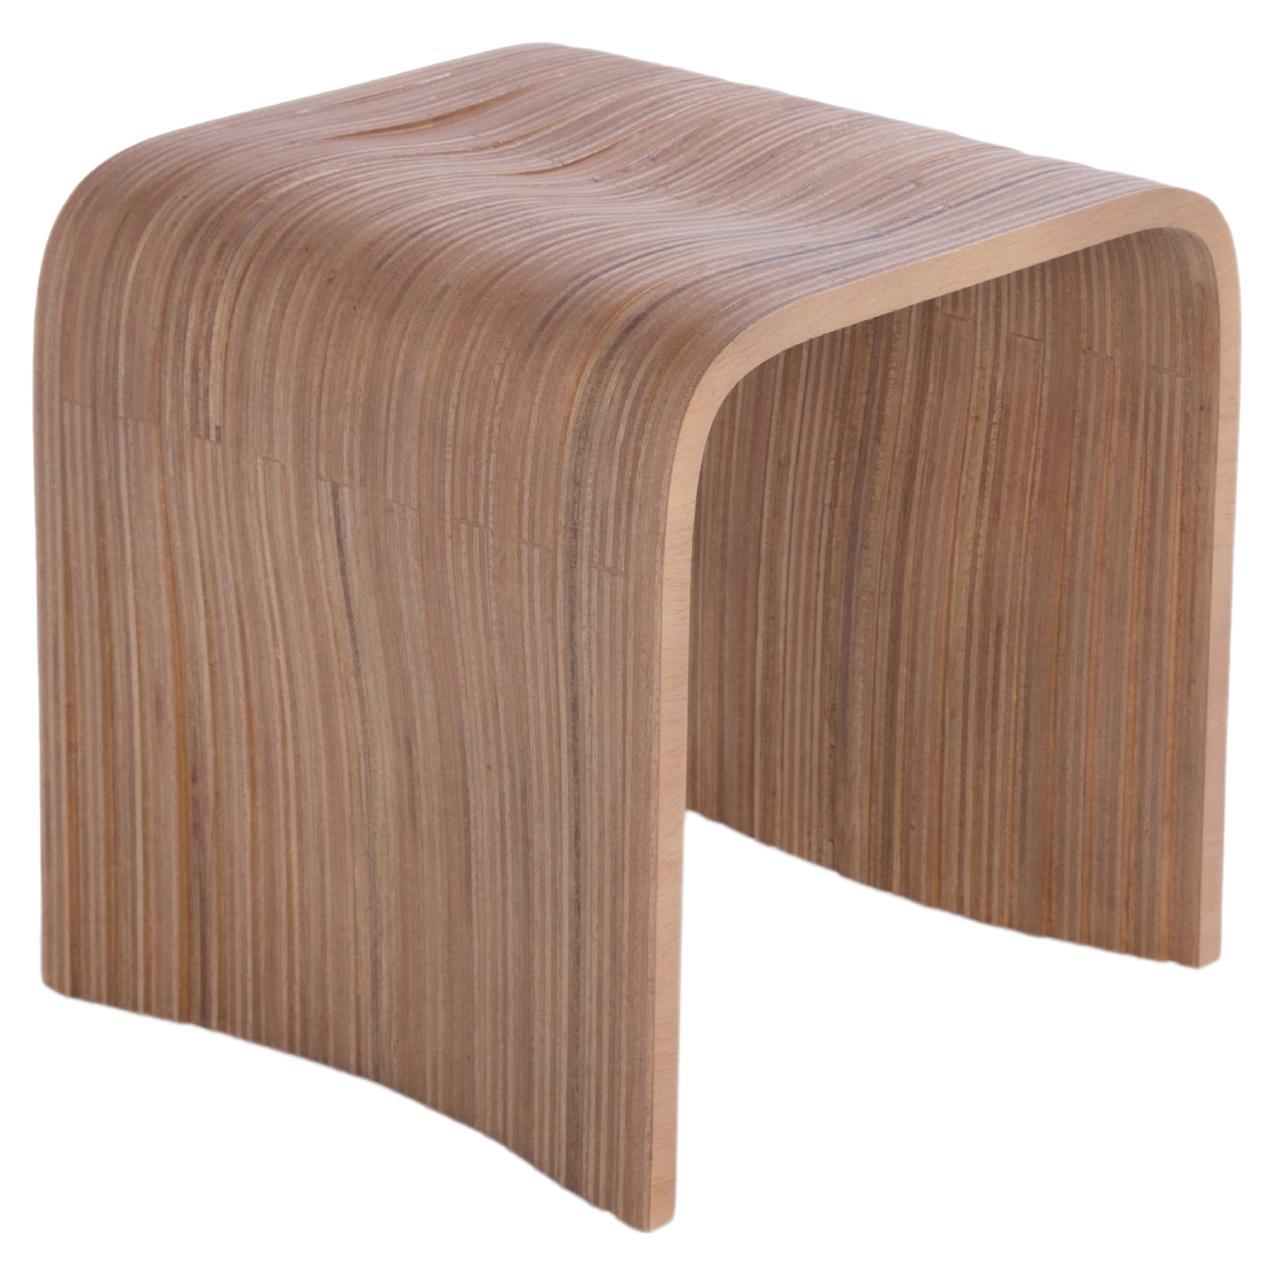 C Stool by Piegatto, a Contemporary and Sculptural Stool